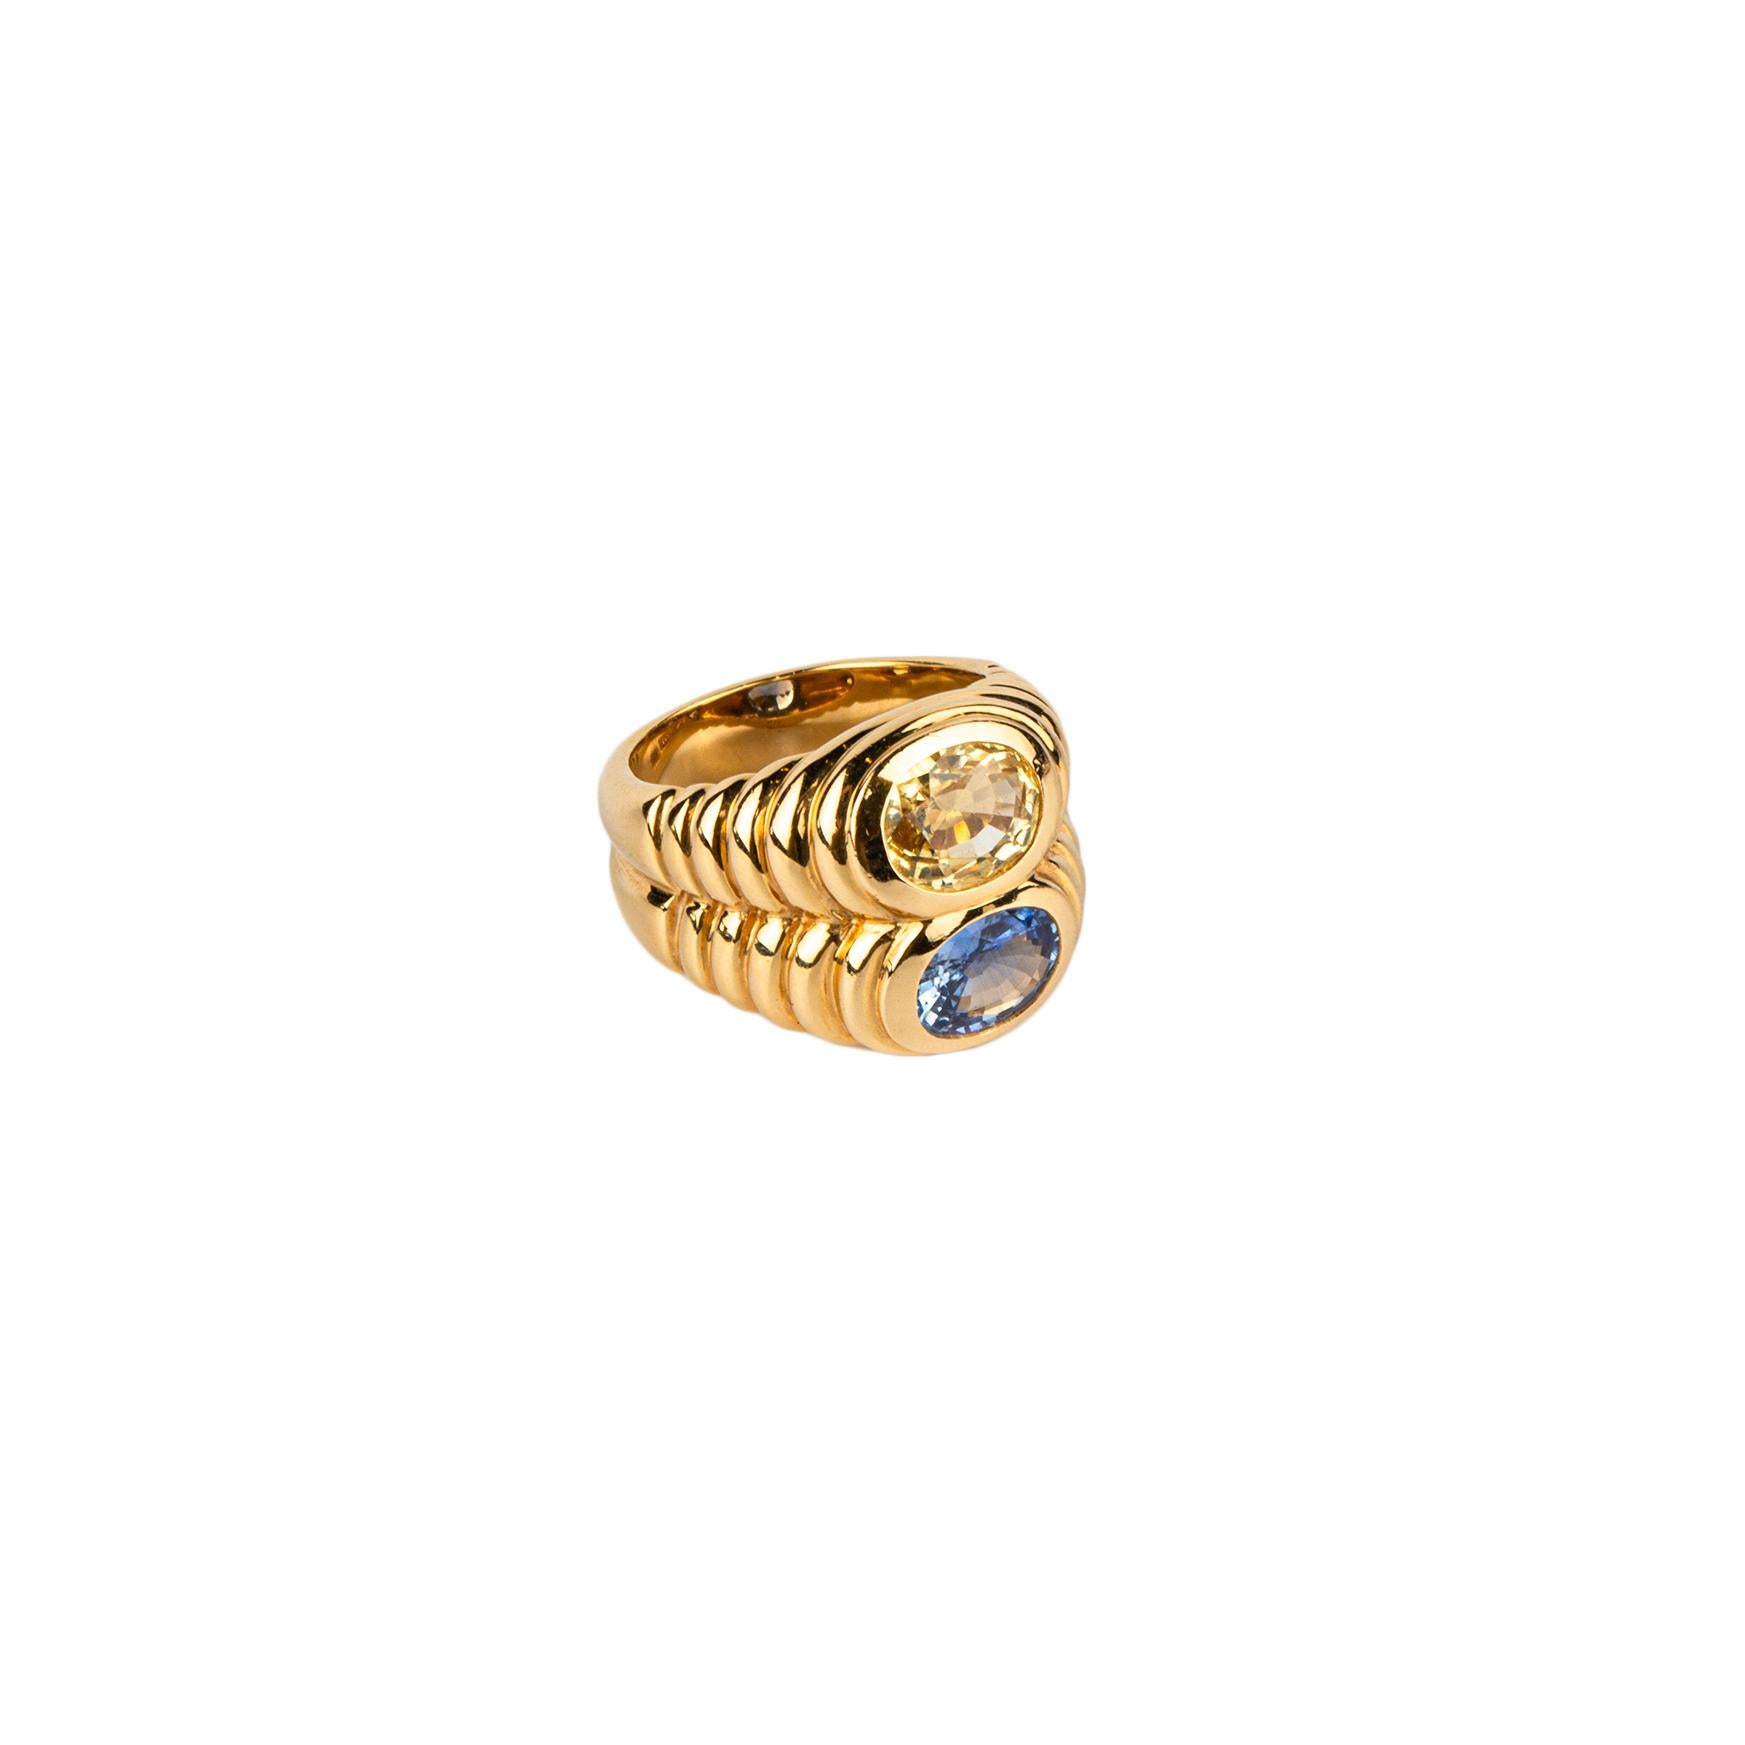 An Iconic Bulgari two-tone ring in 18-carat gold, with yellow and blue sapphires. Made in Italy, circa 1980.